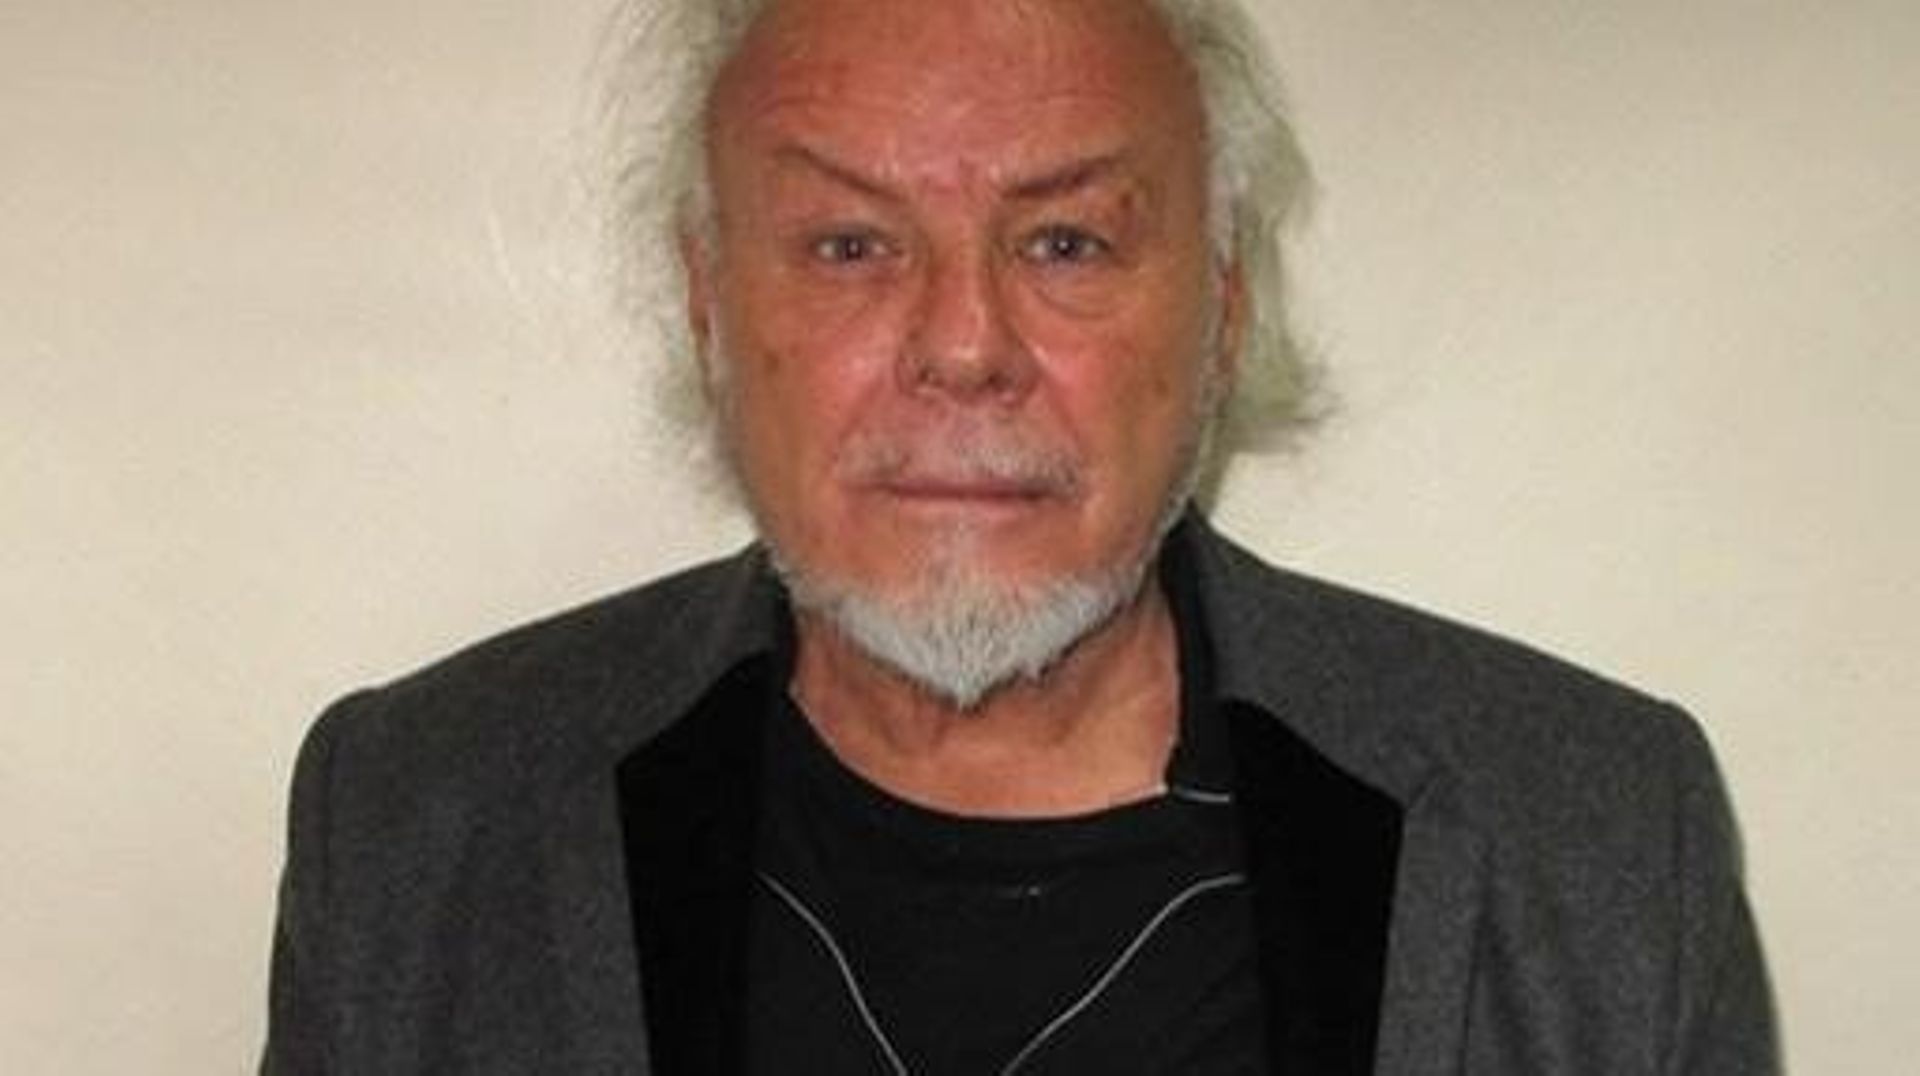 A handout released by the British Metropolitan Police Service (MPS) in London on February 6, 2015 shows the custody photograph of British former pop star Gary Glitter, whose real name is Paul Gadd, who was convicted on February 5, 2015 of six offences of